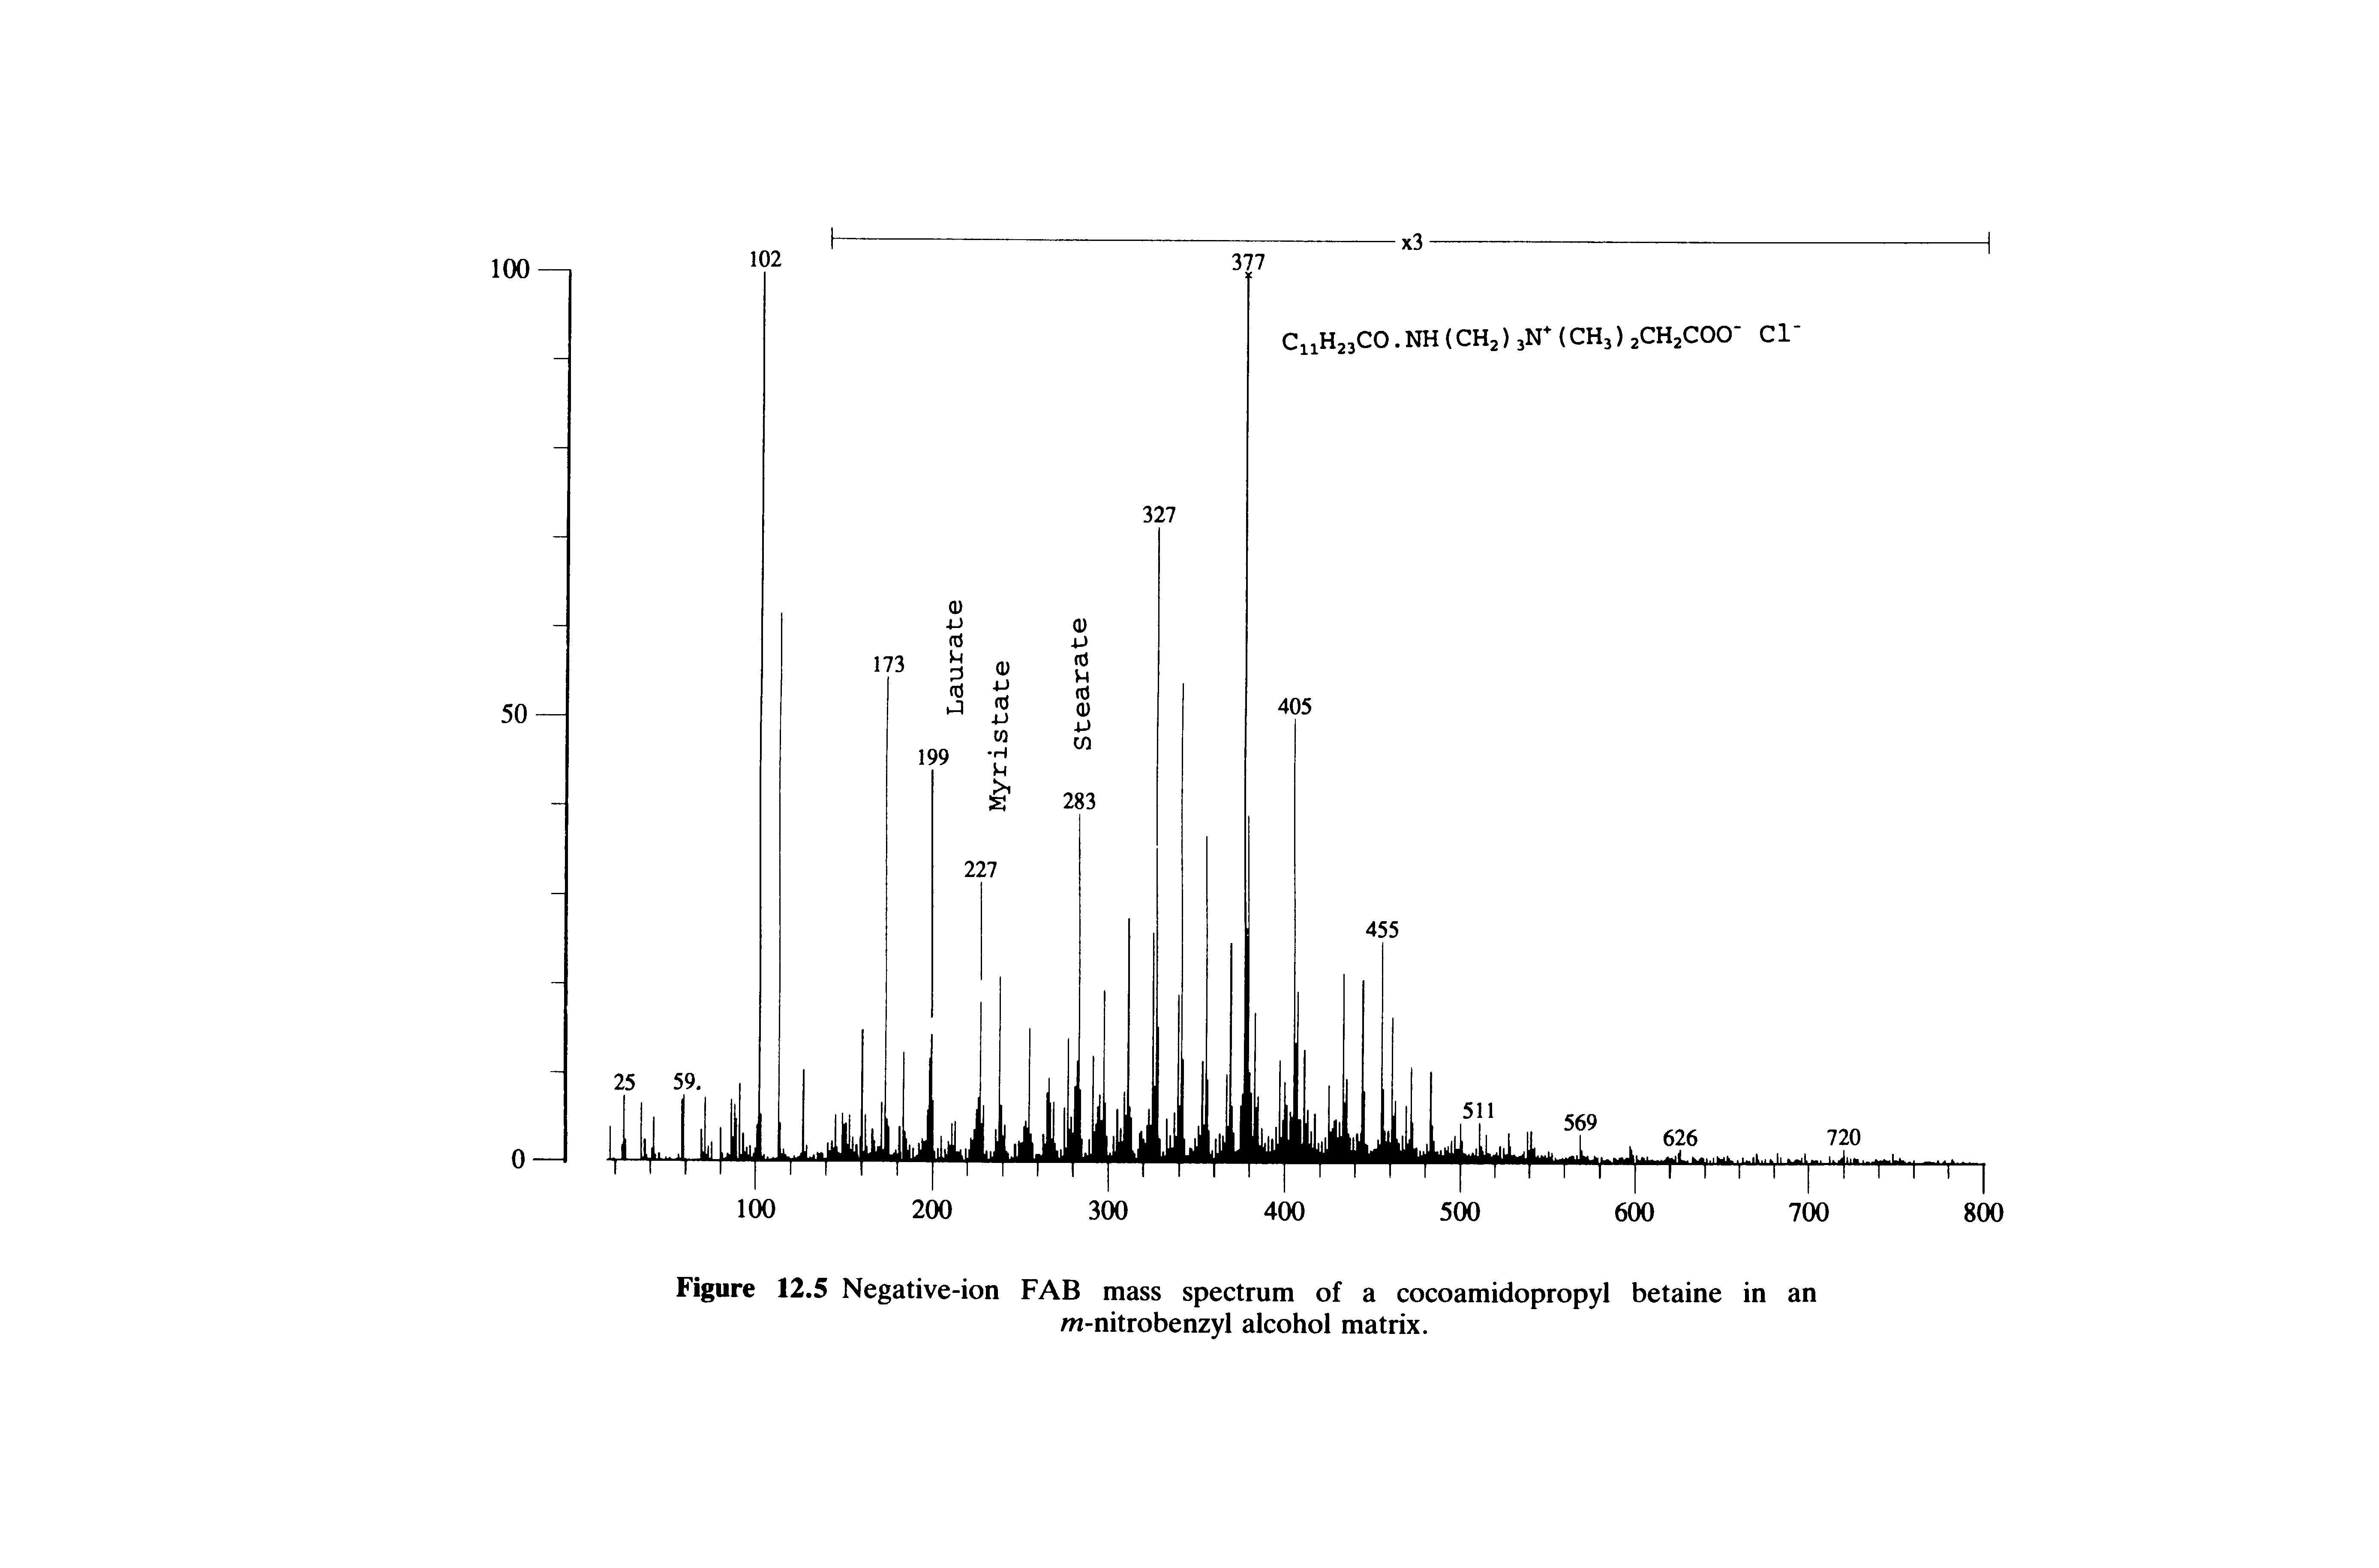 Figure 12.5 Negative-ion FAB mass spectrum of a cocoamidopropyl betaine in an m-nitrobenzyl alcohol matrix.